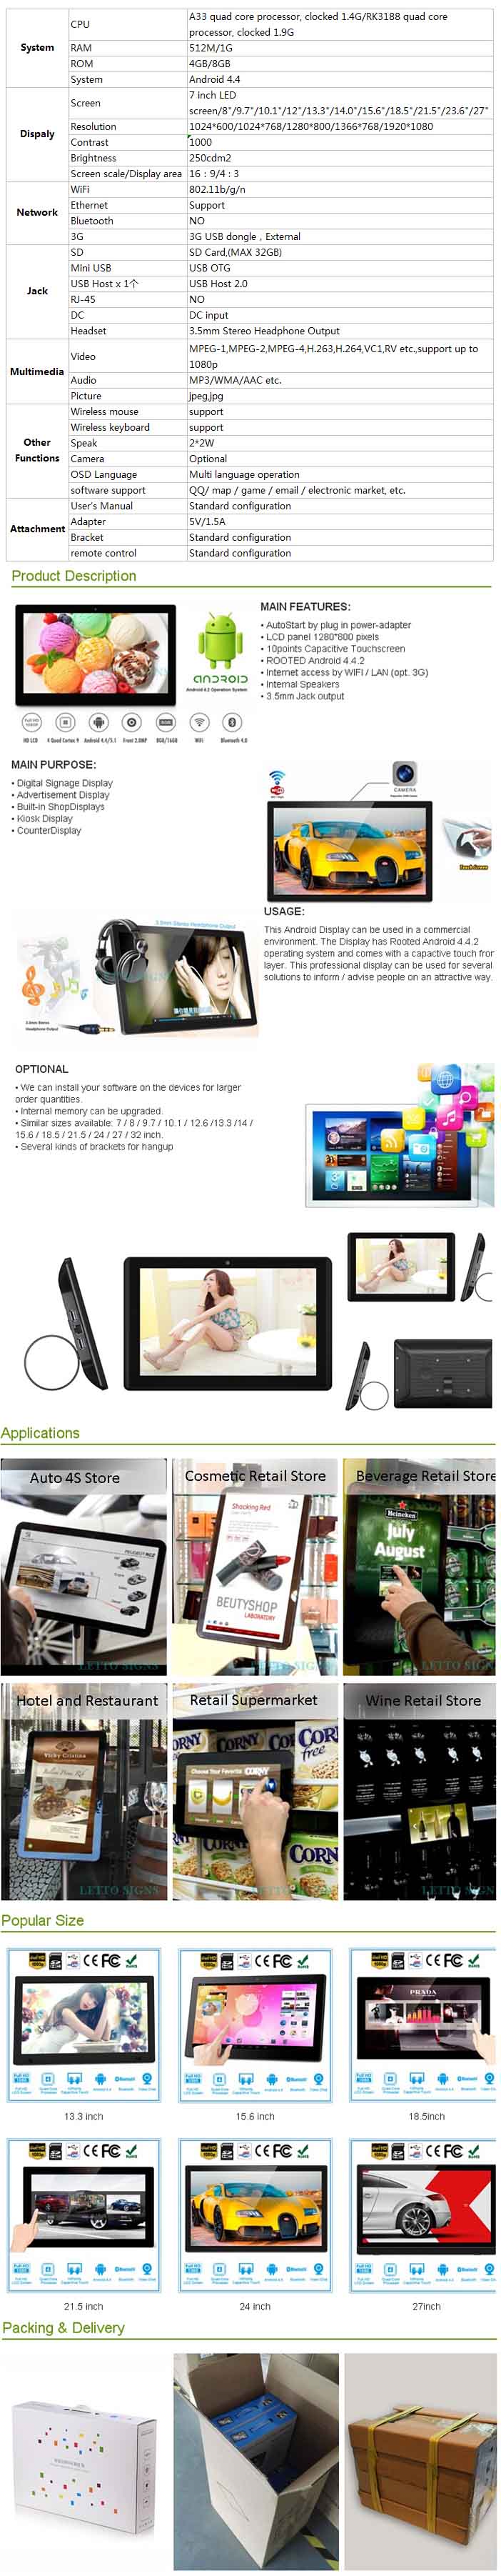 Open frame pos android lcd advertising display